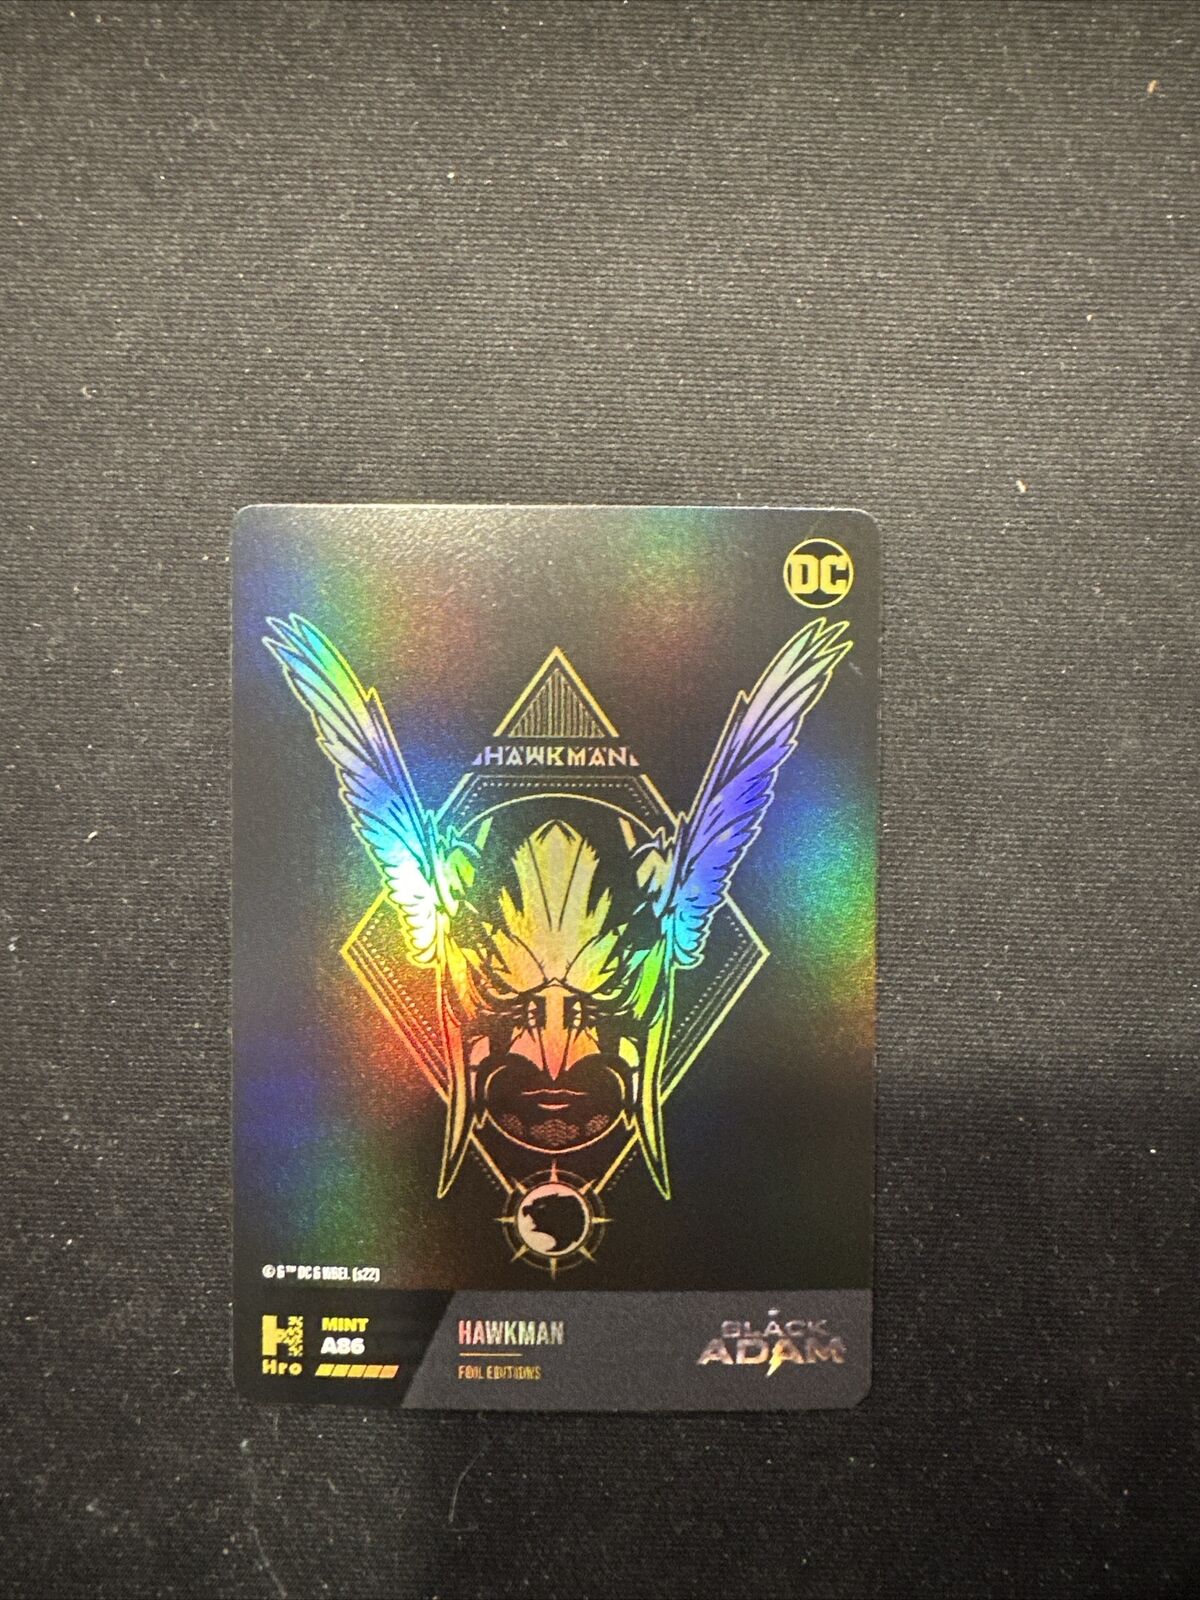 HRO Chapter 2 Hawkman Legendary Foil Black Adam Low Mint A86 Physical Only